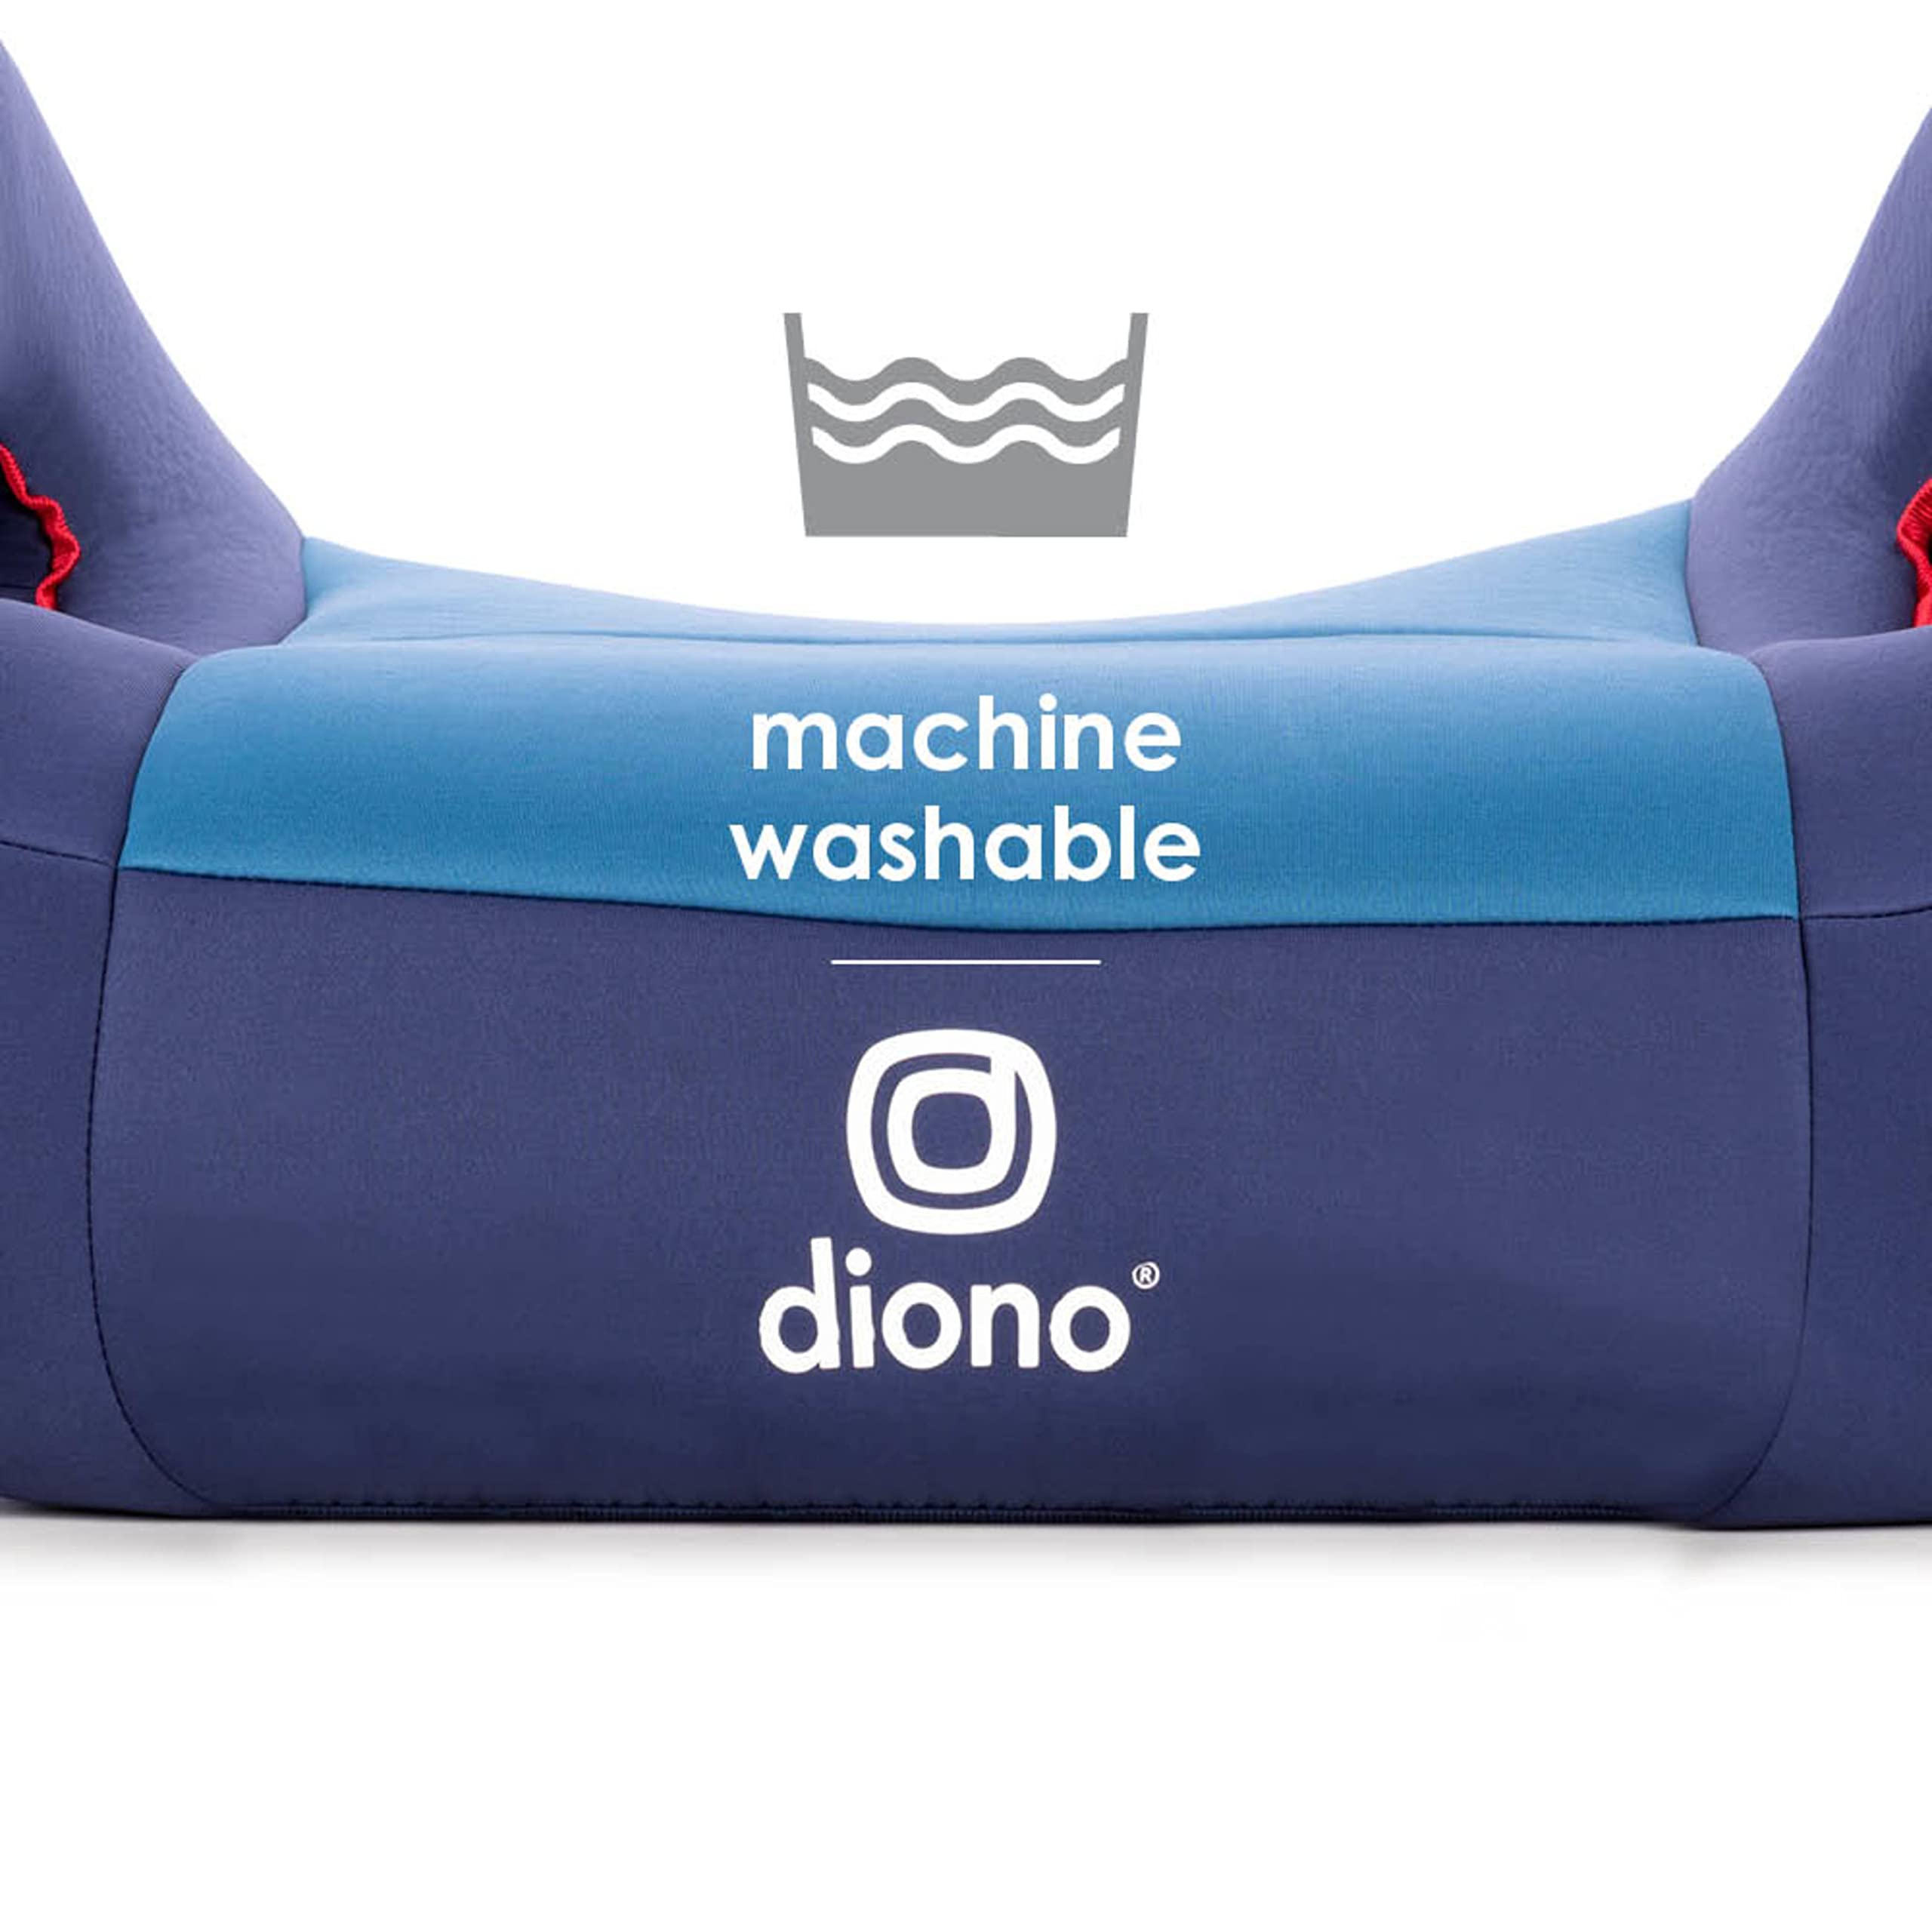 Diono Solana 2 No Latch, XL Lightweight Backless Belt-Positioning Booster Car Seat, 8 Years 1 Booster Seat, Blue